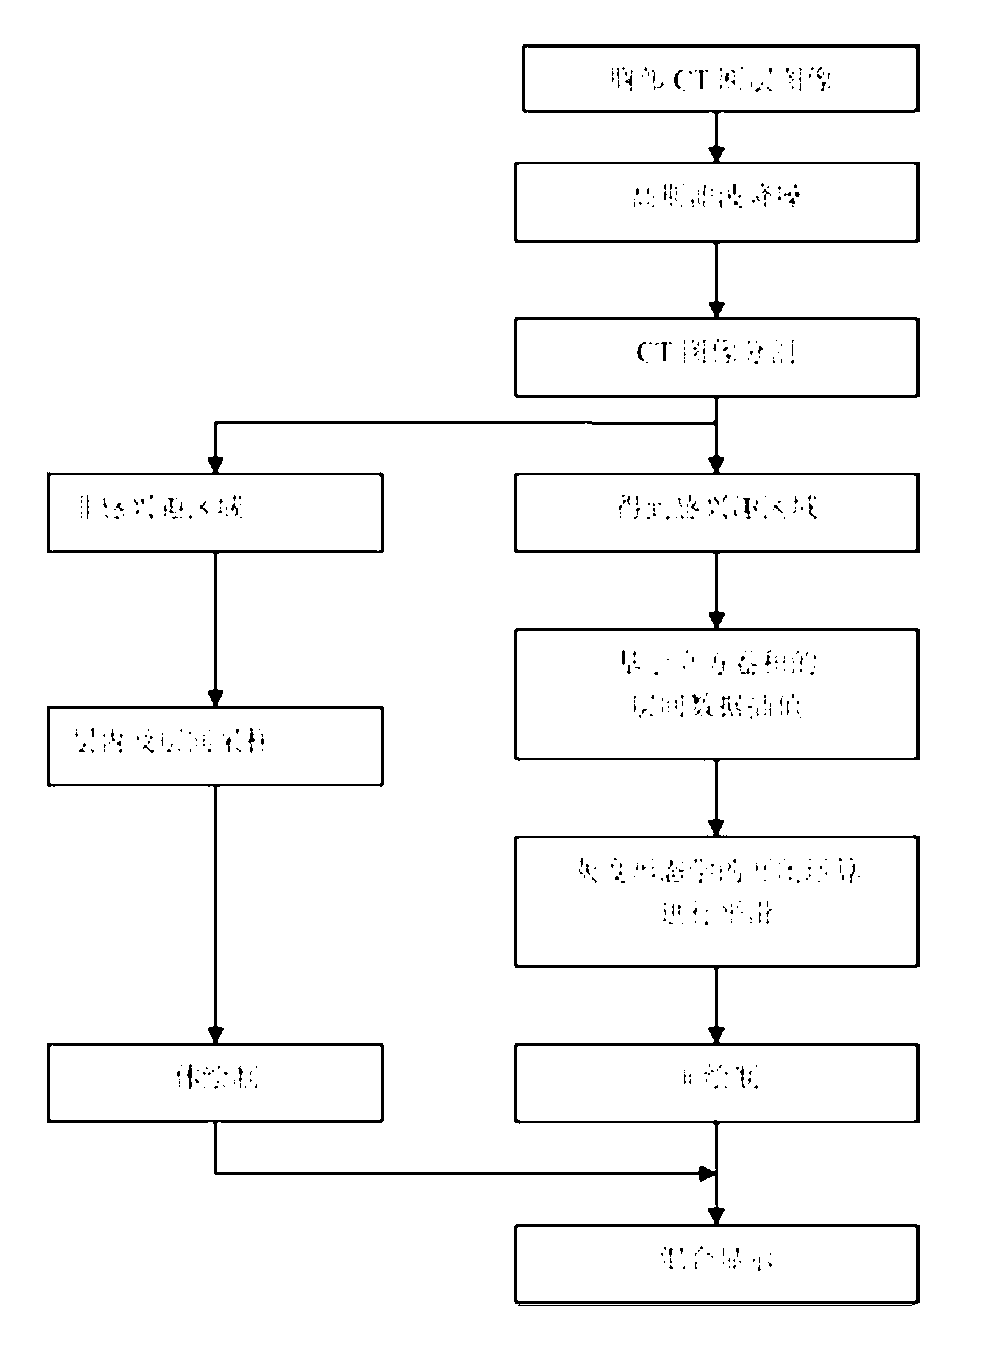 Adaptive hierarchical chest large data display implementation method